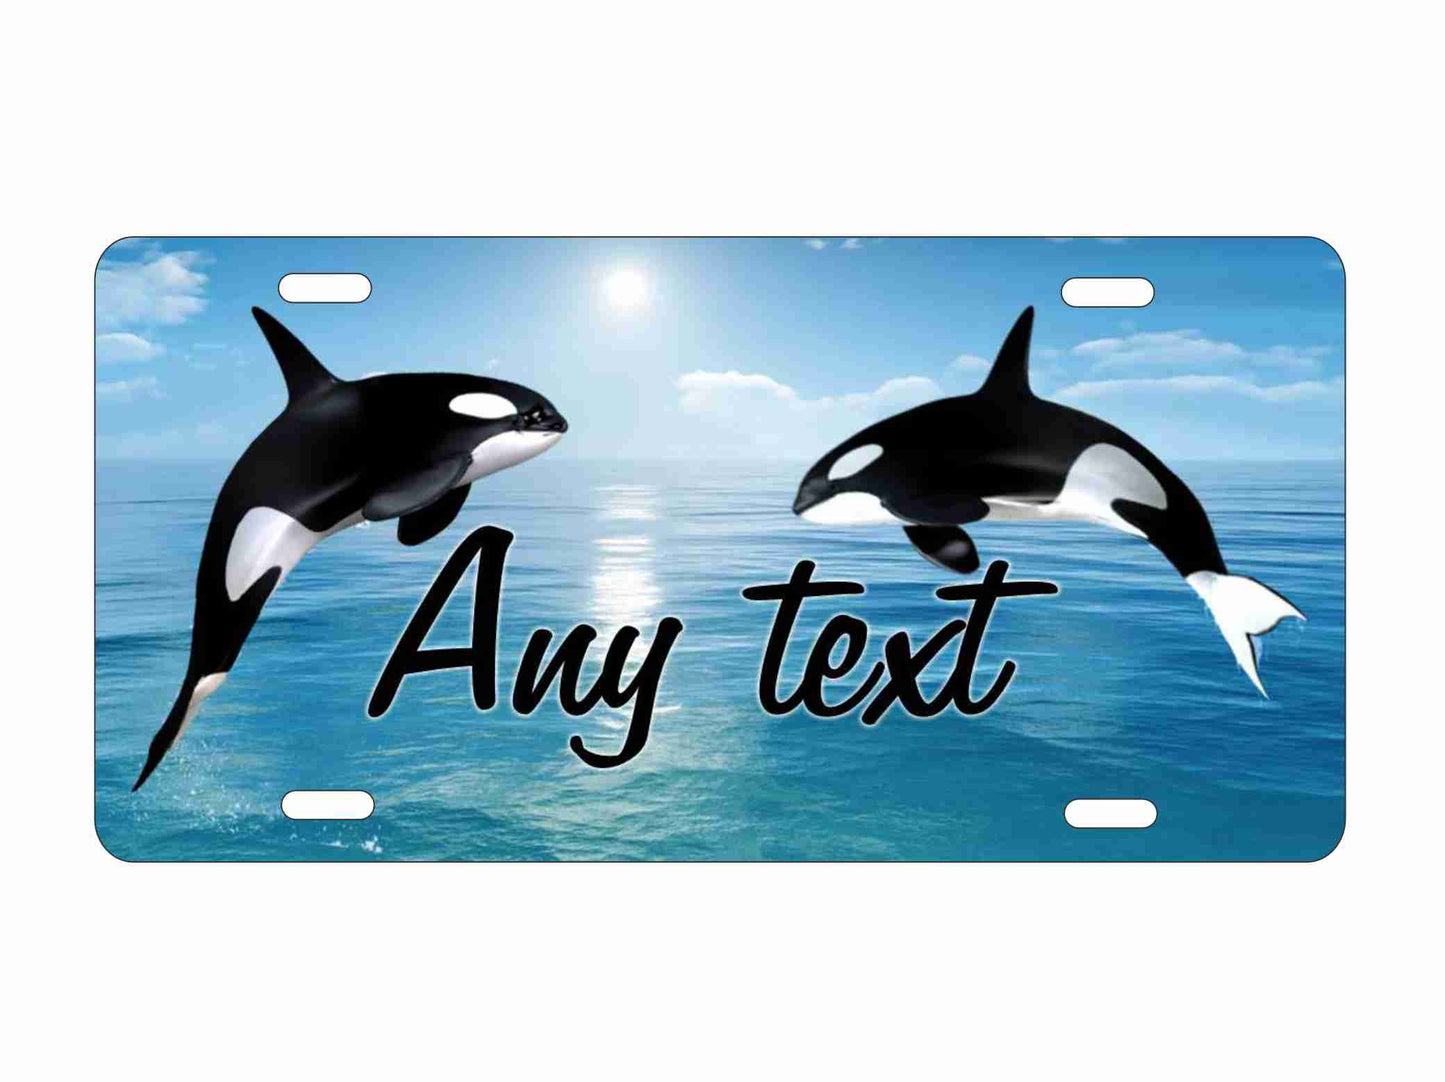 Orca killer whale personalized novelty front license plate Decorative custom vanity car tag